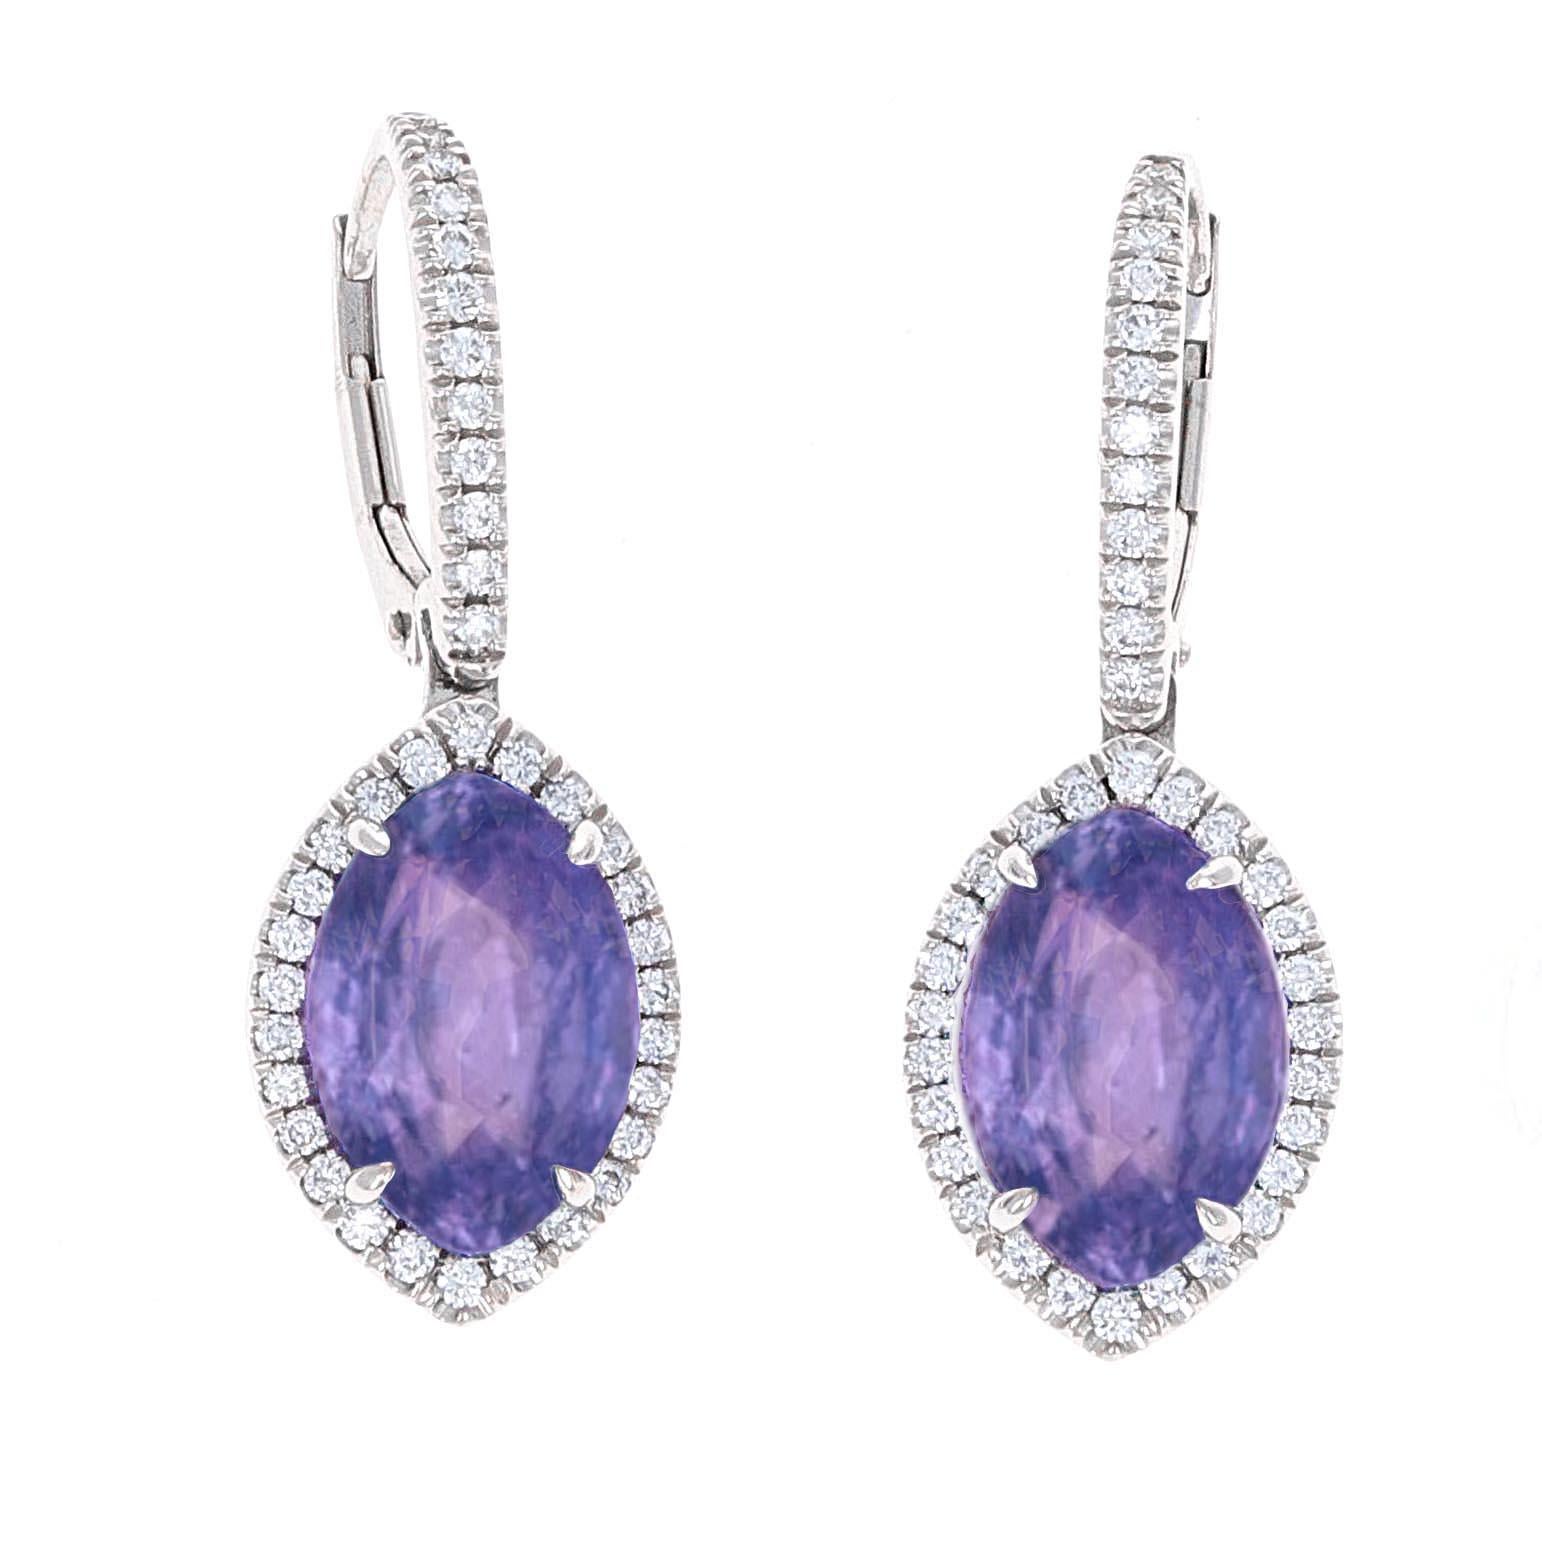 GIA Certified no heat color change marquise sapphire with diamond pave drop earrings. The sapphires weigh 5.03 carats and 4.93 carats, a total of 9.96 carats,  and are GIA certified. The stones measure 12.03 x 8.16 x 6.52mm and 12.03 x 8.12 x